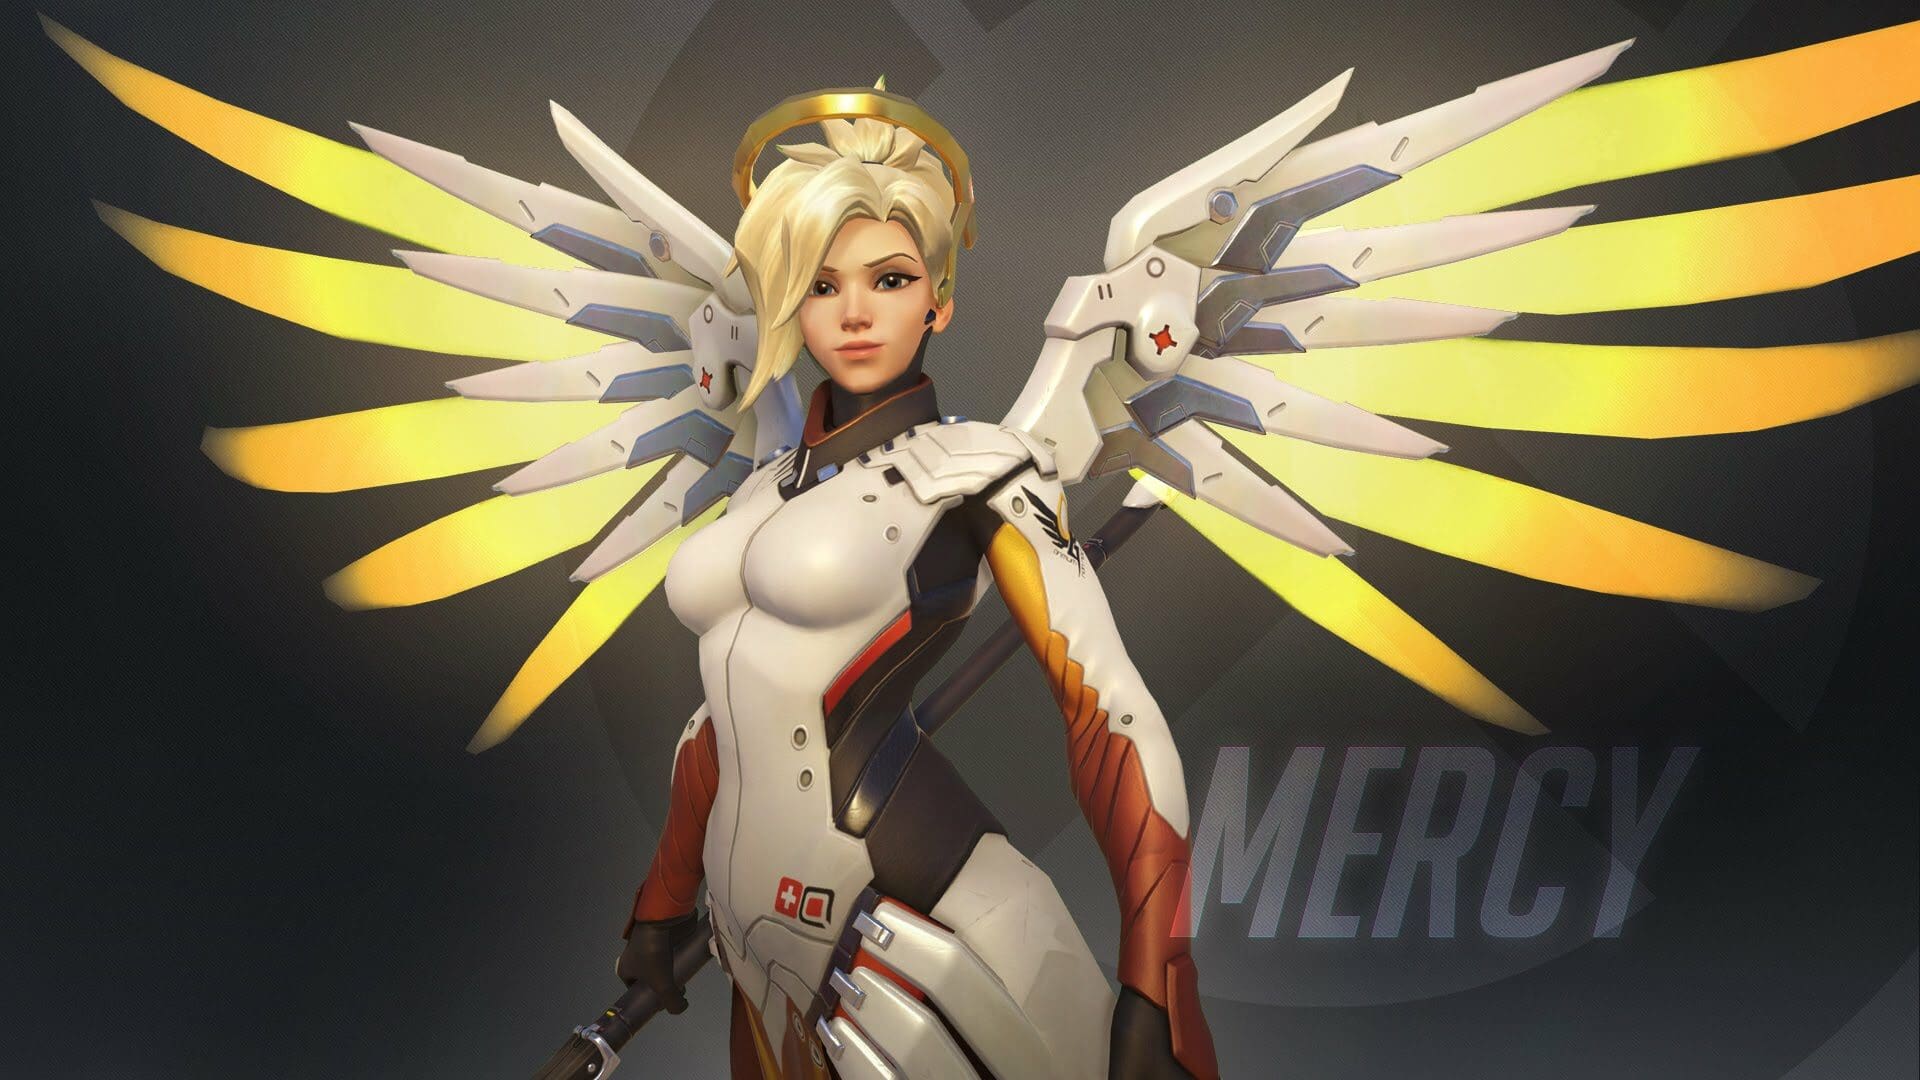 Upcoming Overwatch Update Changes Mercy’s Ultimate